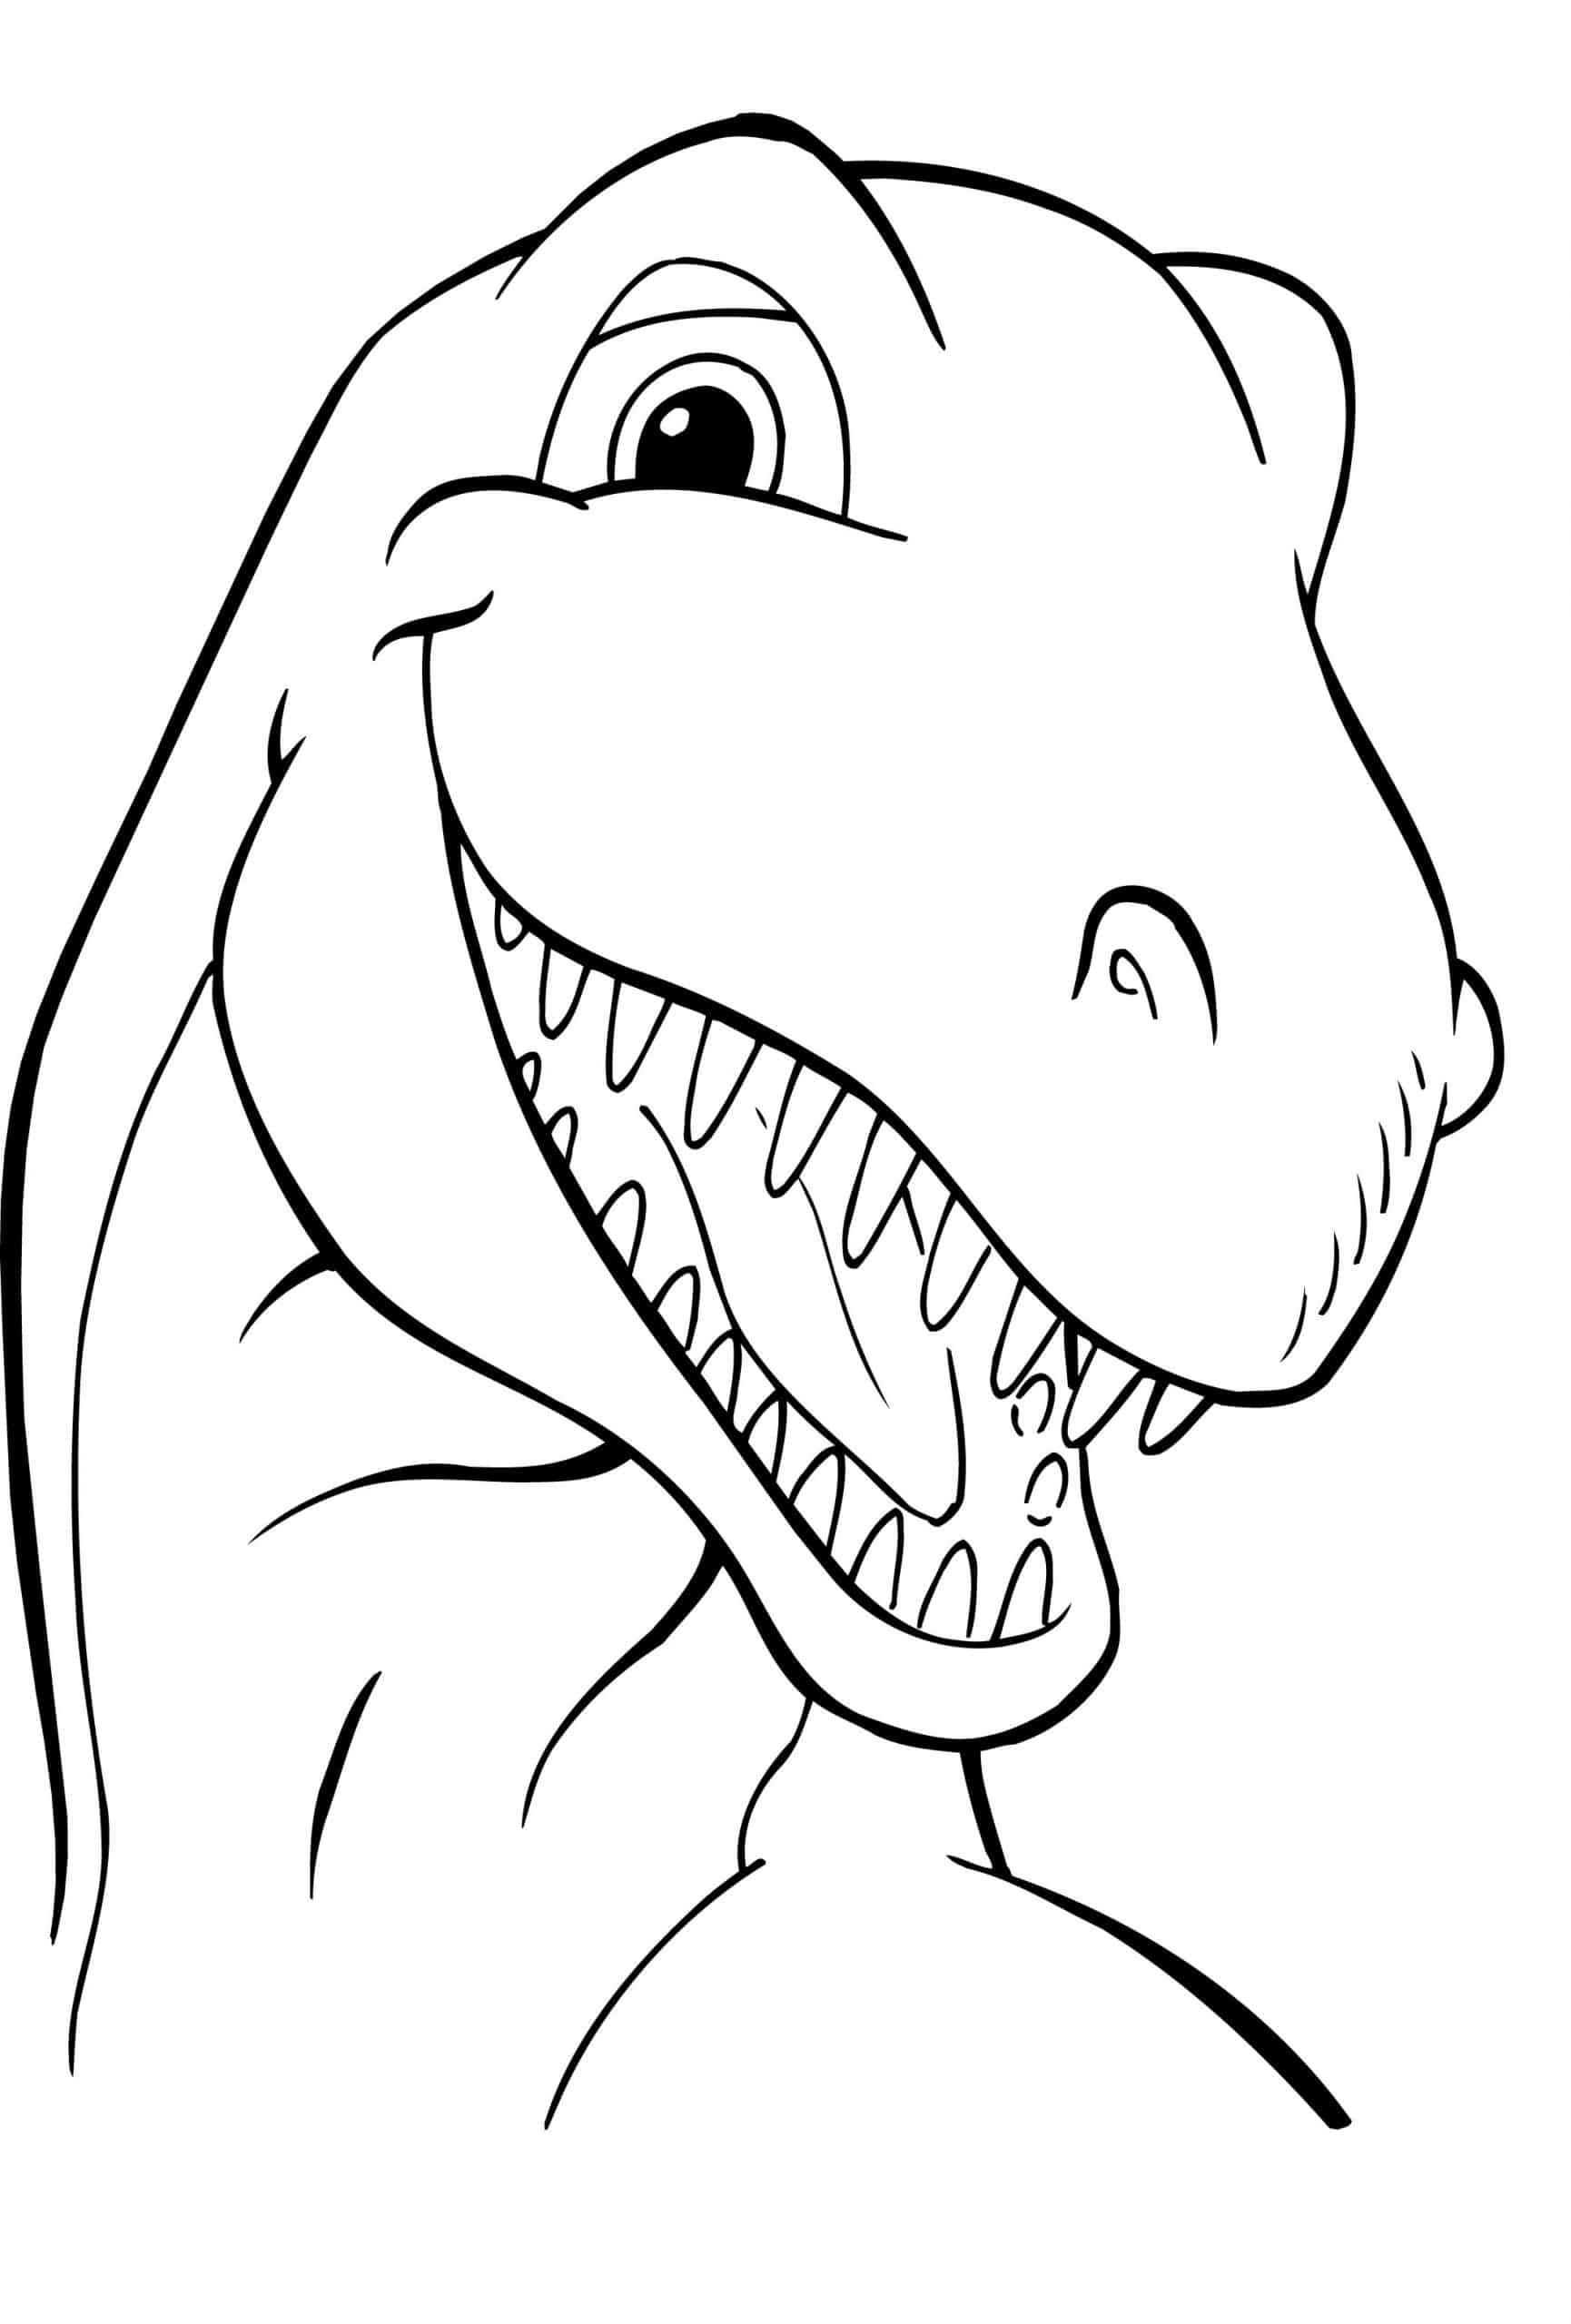 Dinosaurs coloring pages for color - DDC123